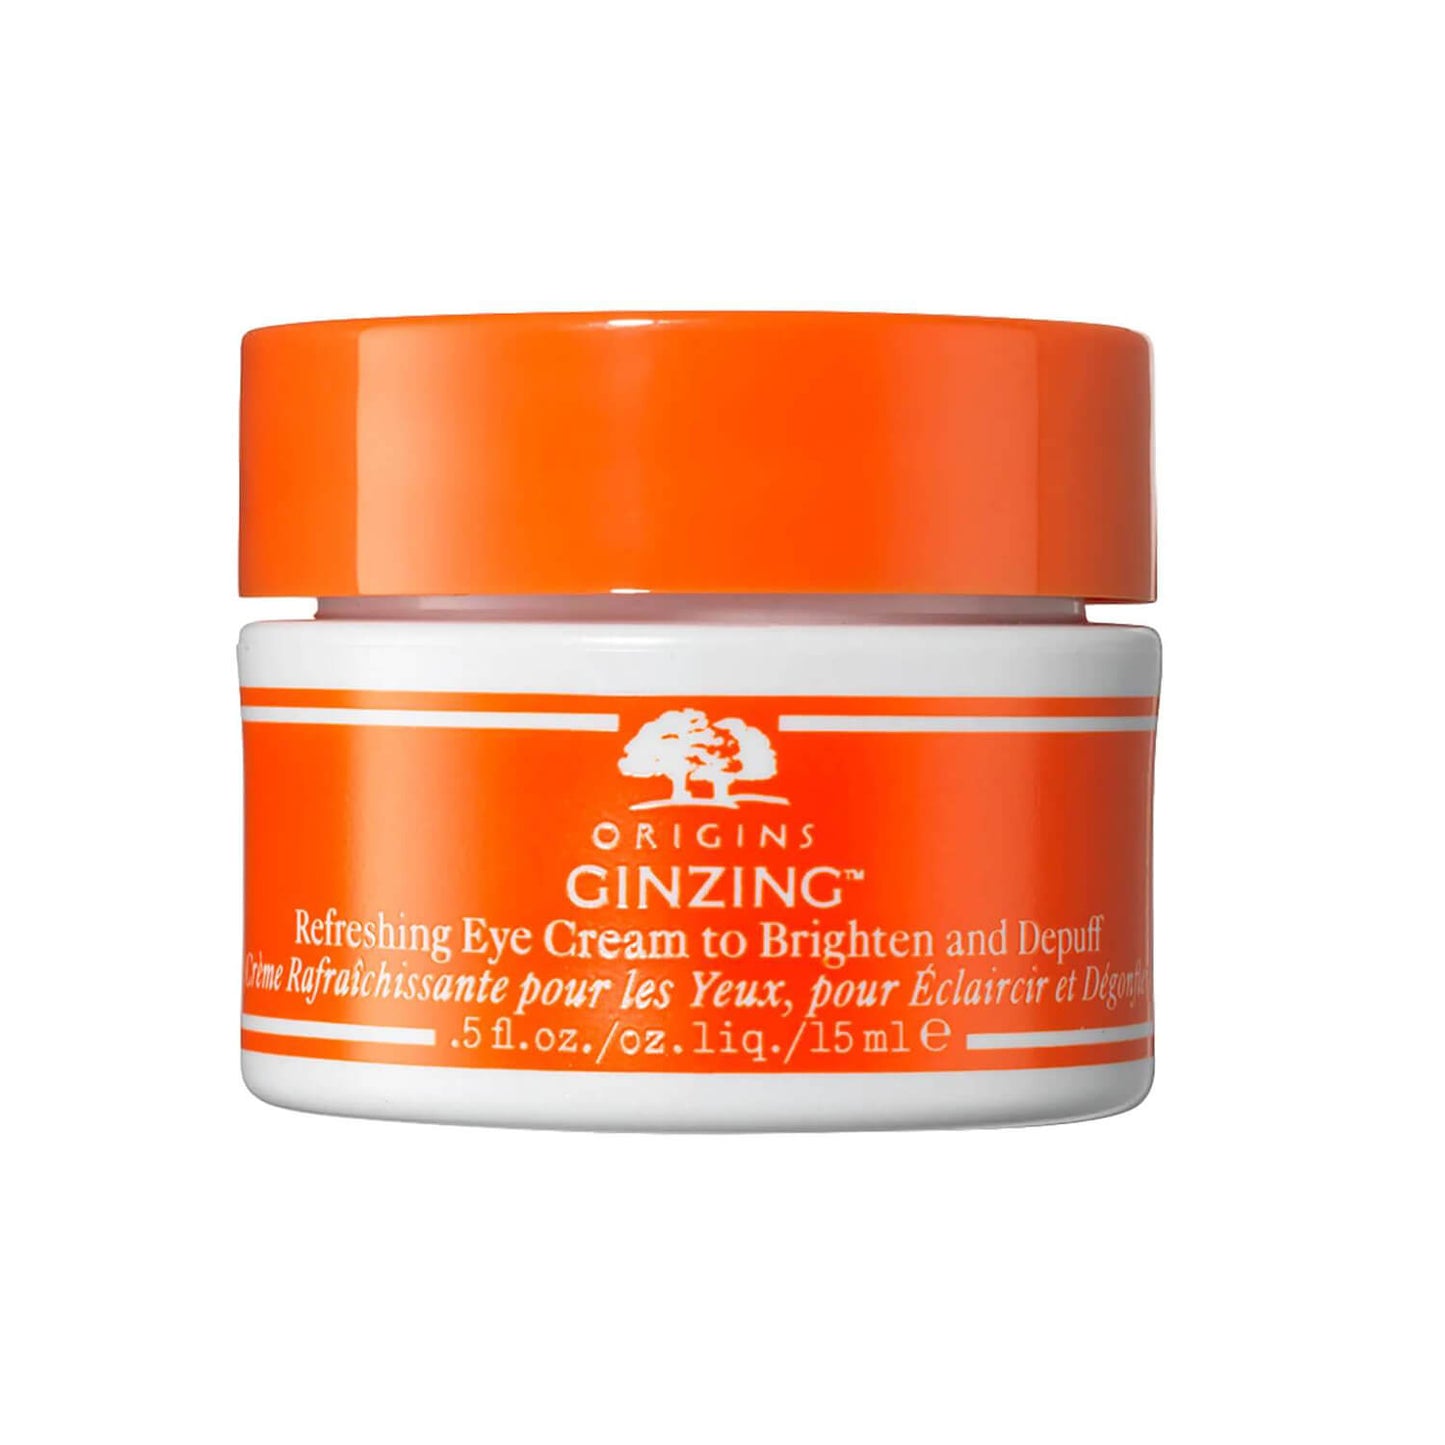 Origins Vitamin C Eye Cream for dark circles, skin dryness, eye puffiness, uneven textures available at Heygirl.pk for delivery in Karachi, Lahore, Islamabad across Pakistan.